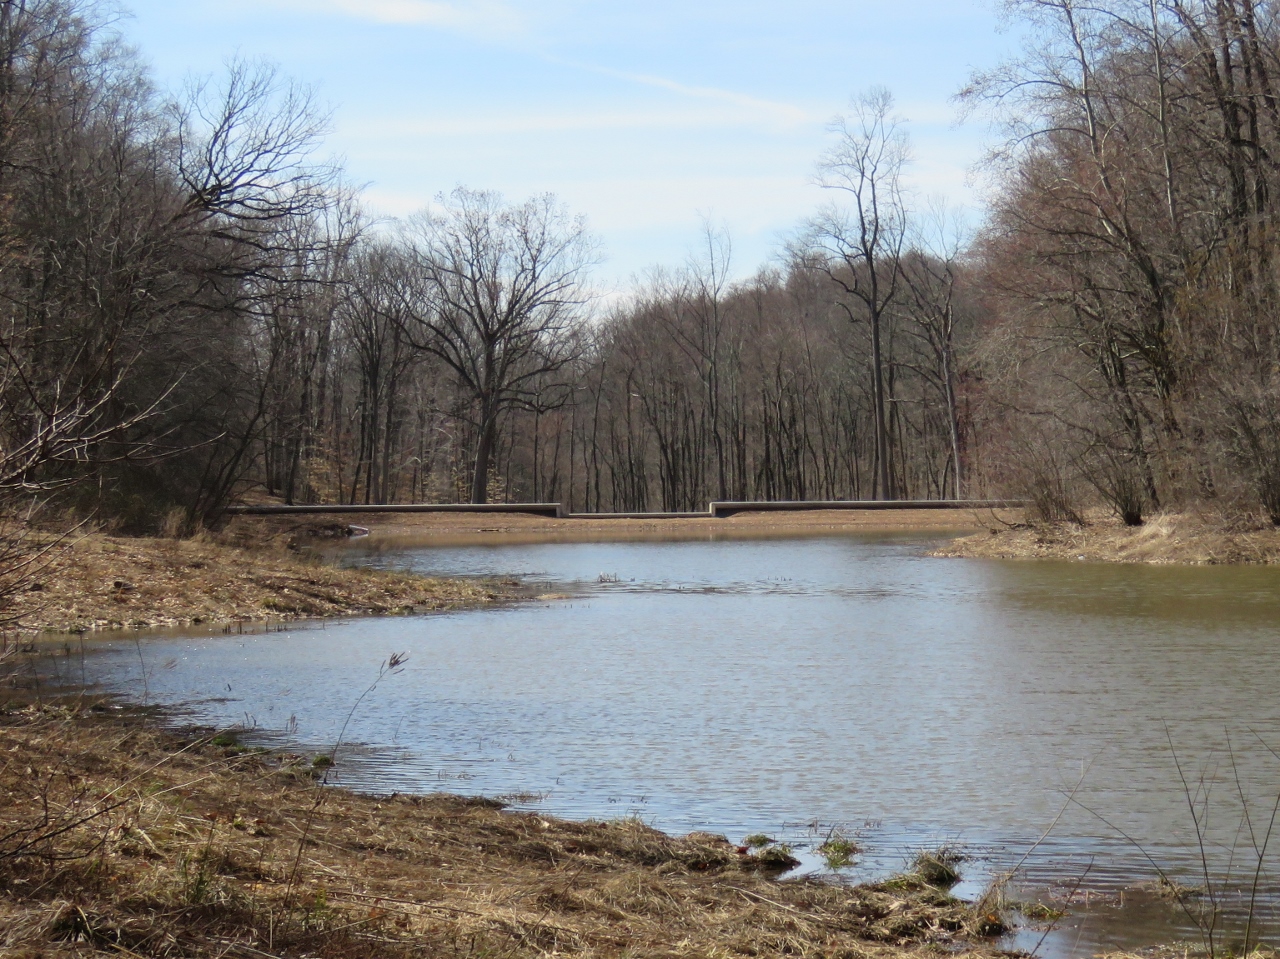 View of Surprise Lake at Watchung Reservation - Photo credit: Daniela Wagstaff